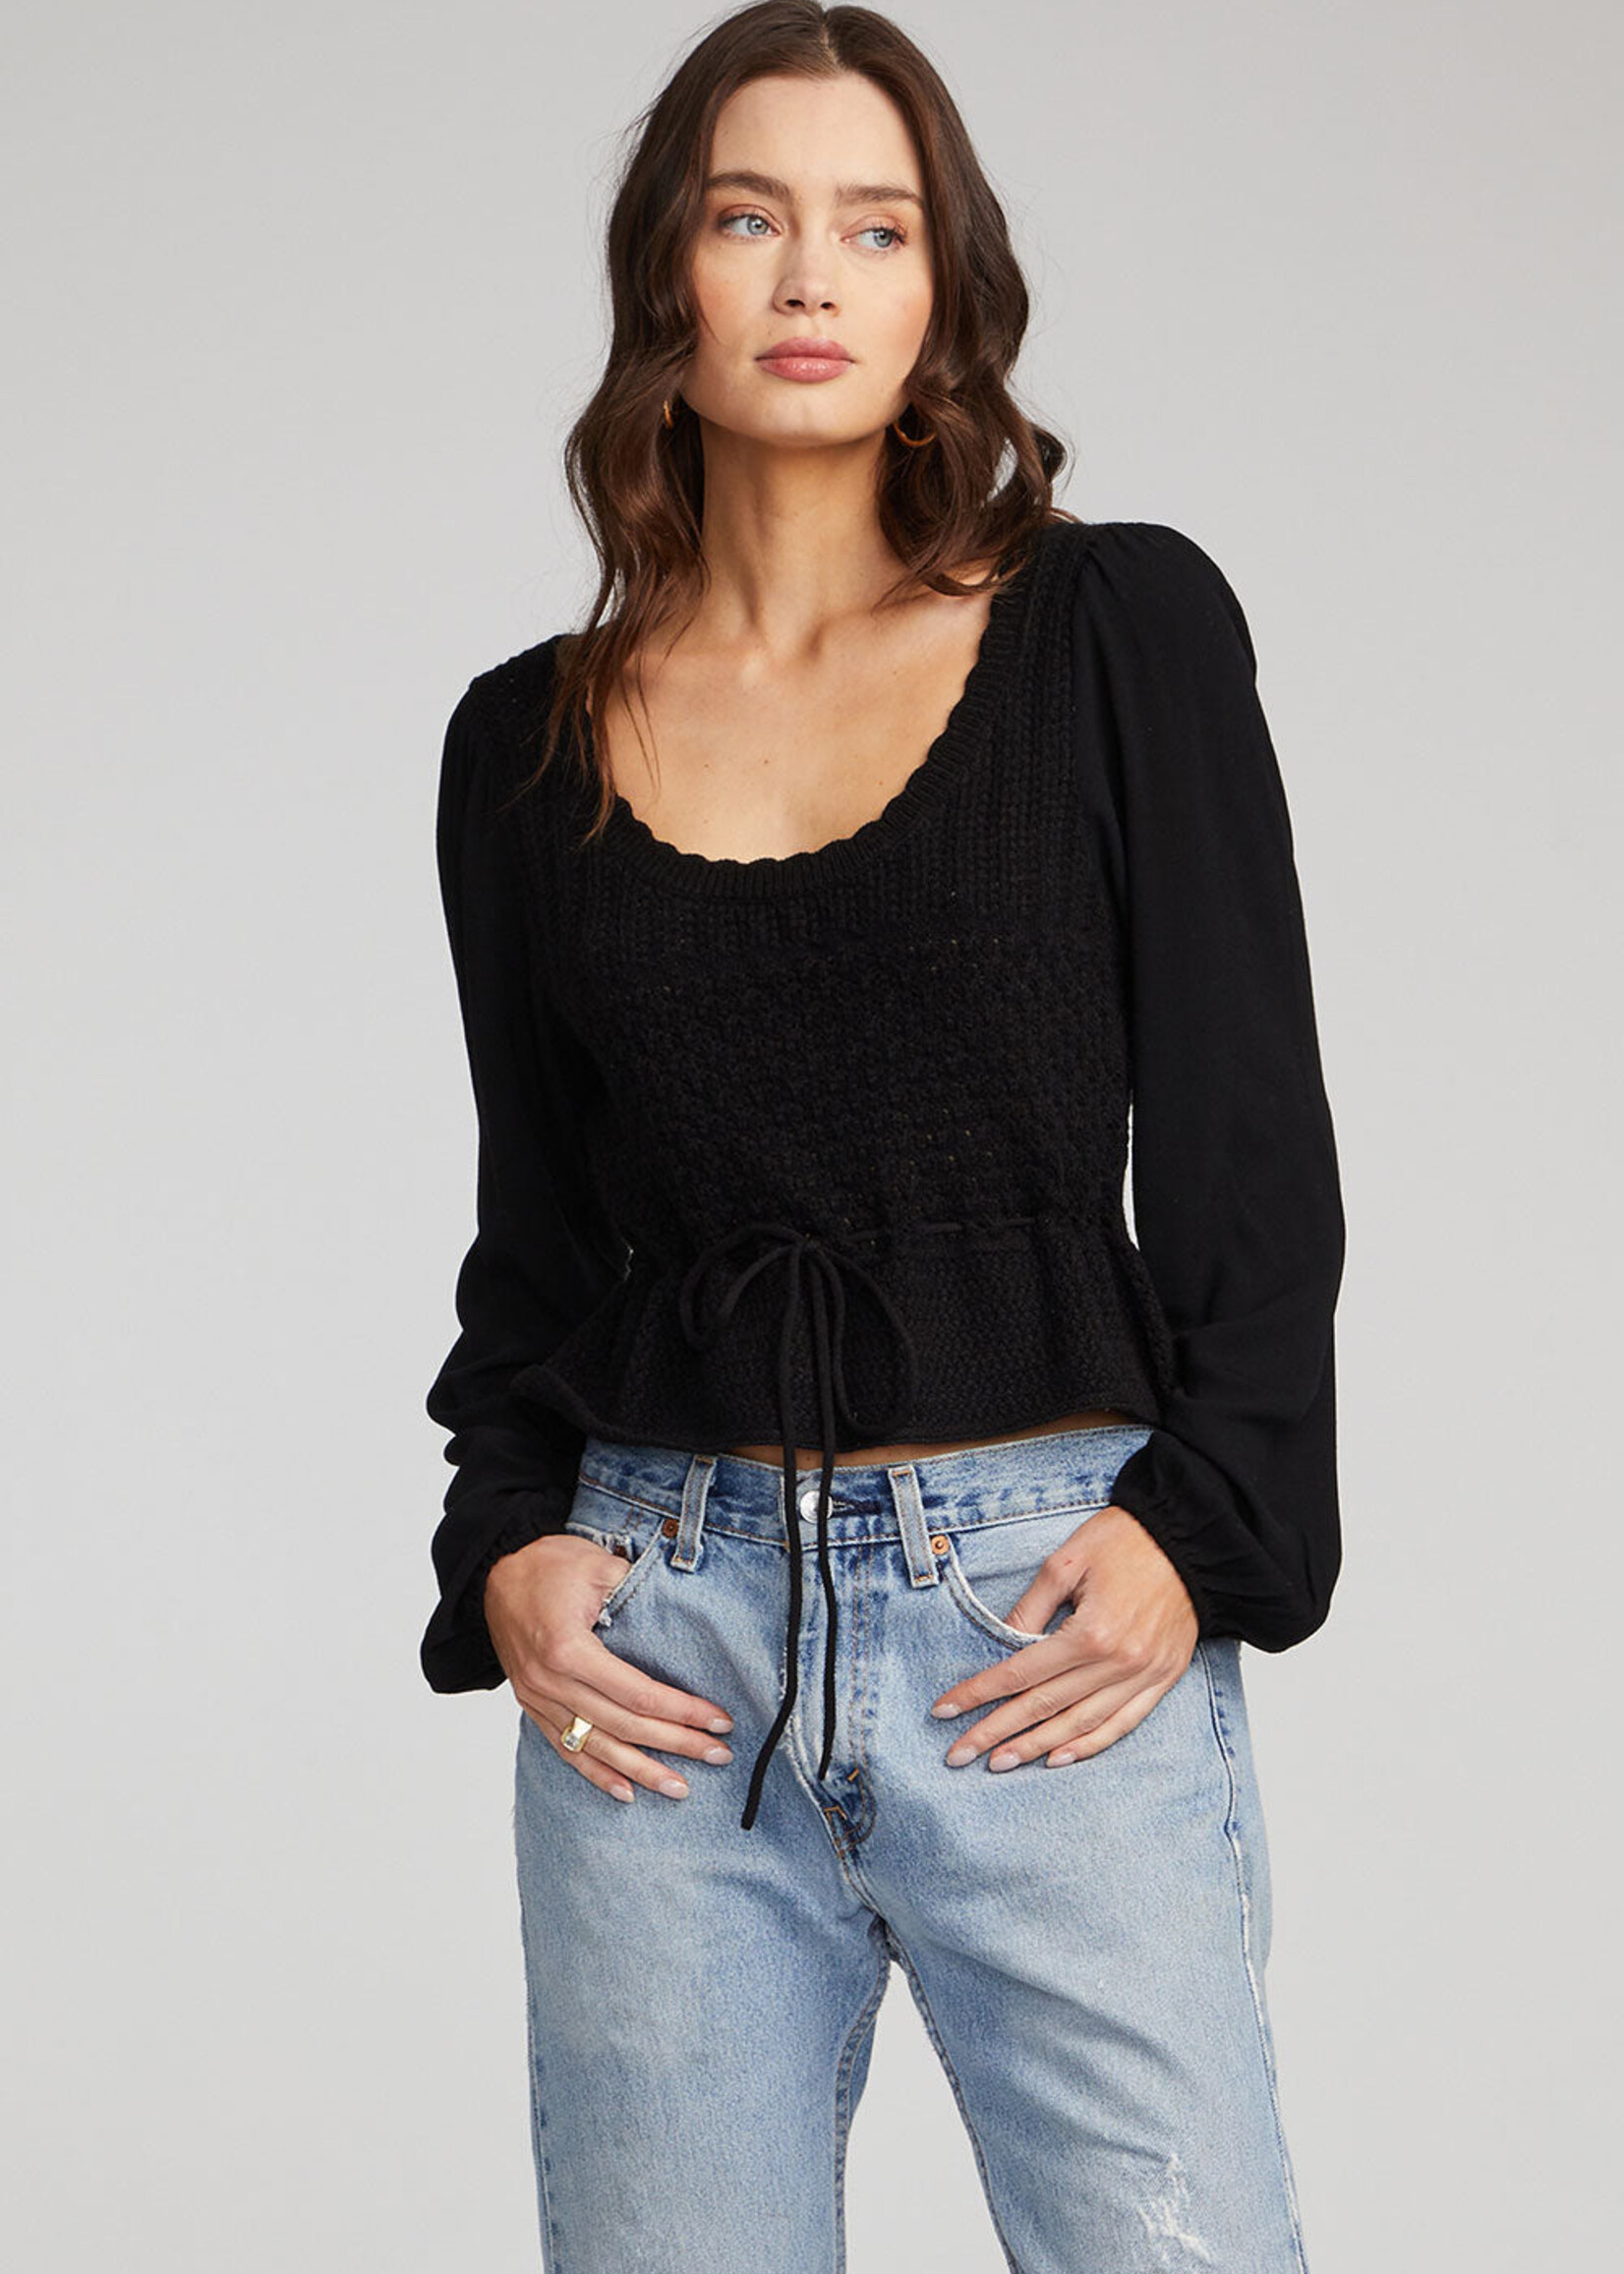 Saltwater Luxe Kirtley Sweater